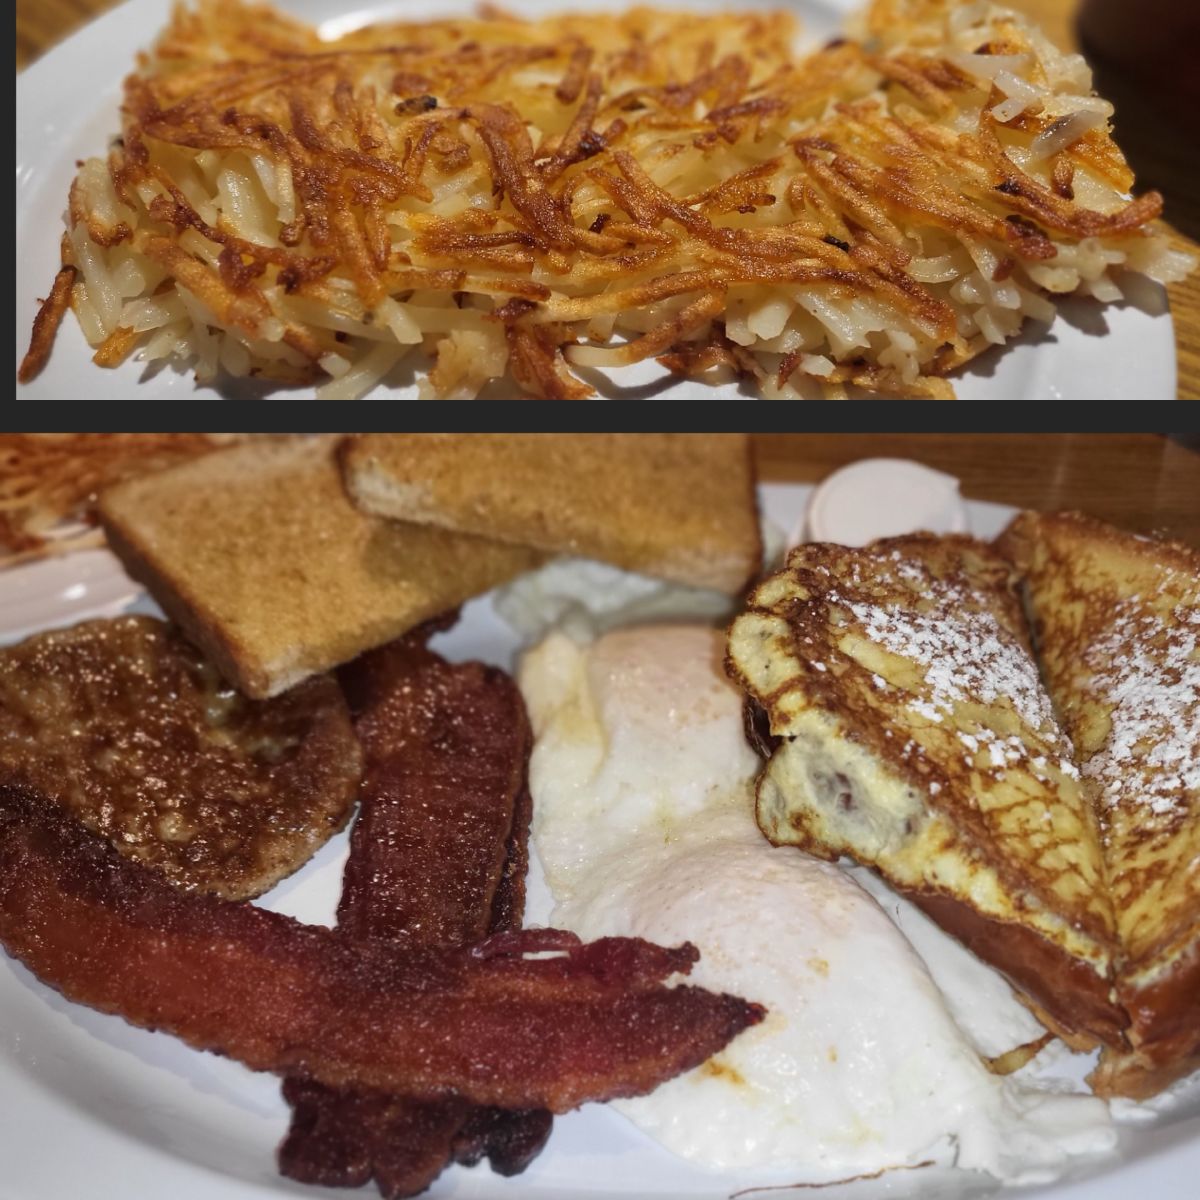 The French Toast Breakfast, with added hashbrowns and toast, is a staple option at "The Place" in Glendale, Ariz., a family-owned restaurant that has been serving tasty, scratch-made breakfast, brunch, and lunch items for more than 30 years.